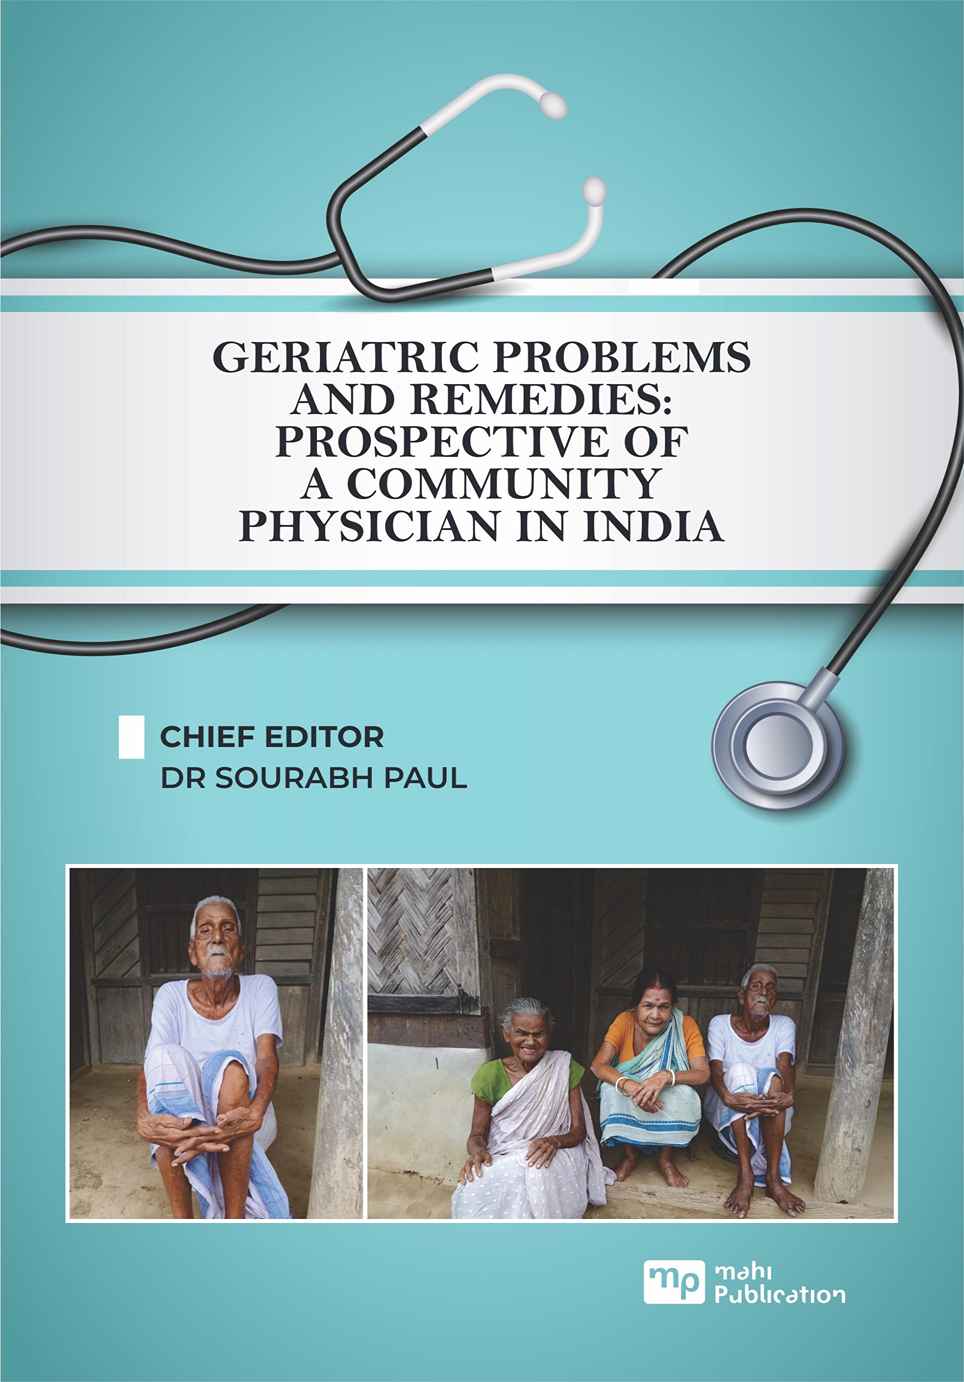 Geriatric Problems And Remedies: Prospective Of A Community Physician In India